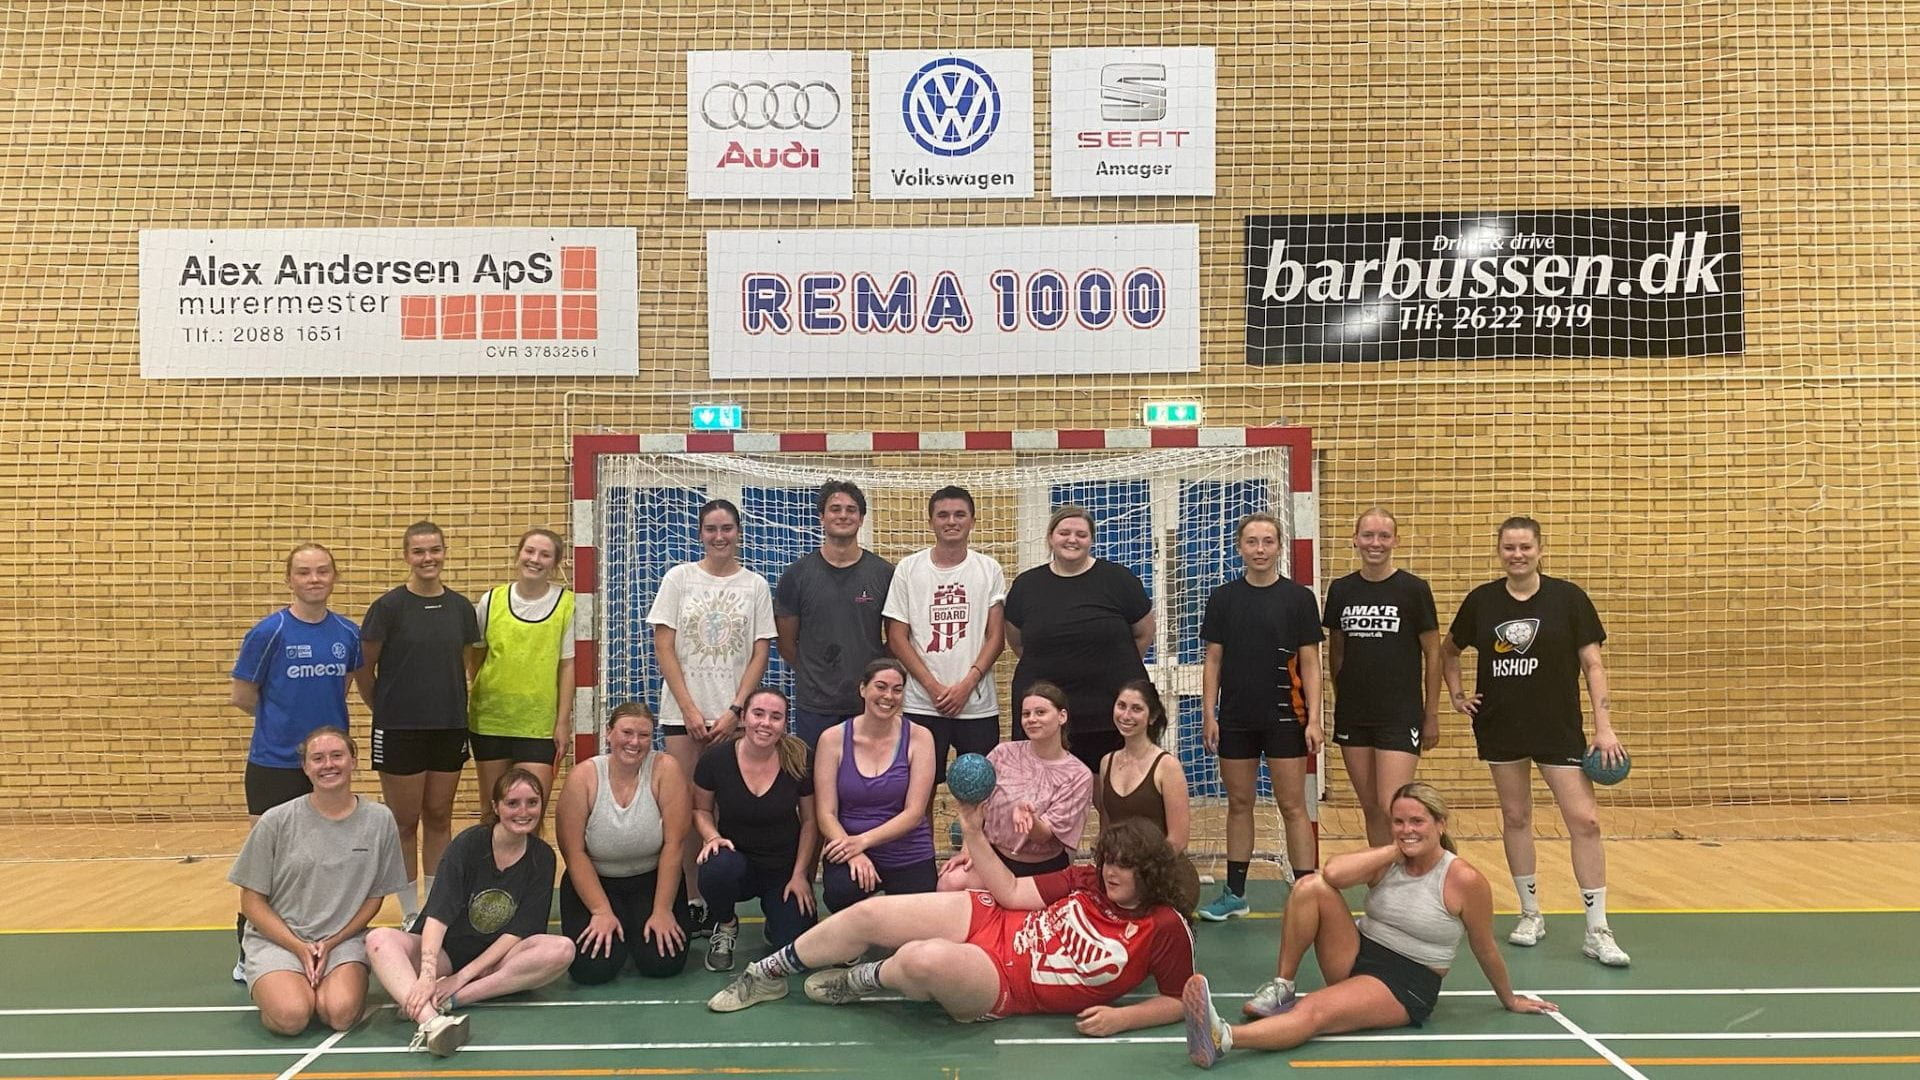 A group of students and handball players pose on a green handball court in front of a net and a brick wall with sports banners behind them